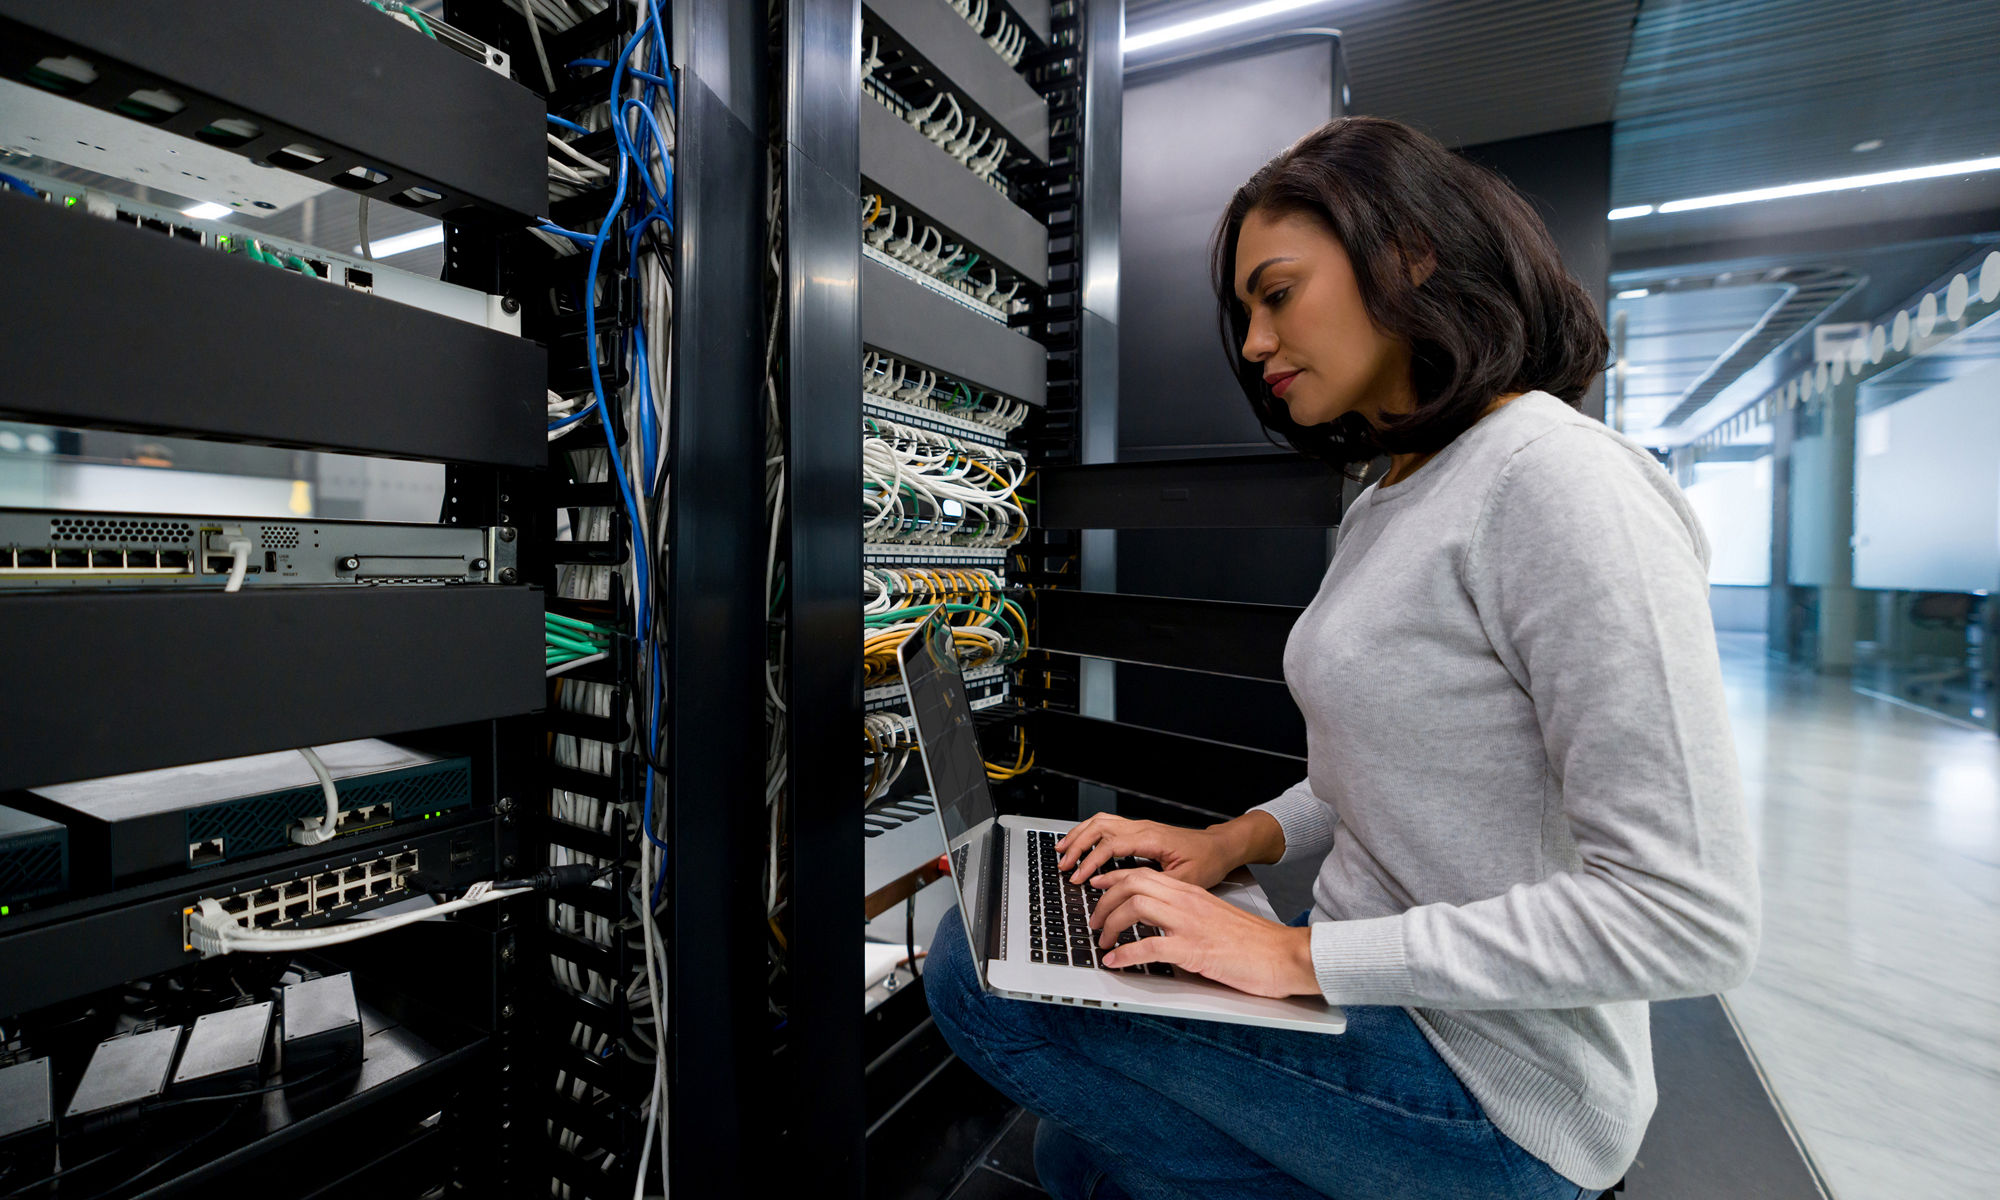 Female IT support technician fixing a network server at an office - technology concepts